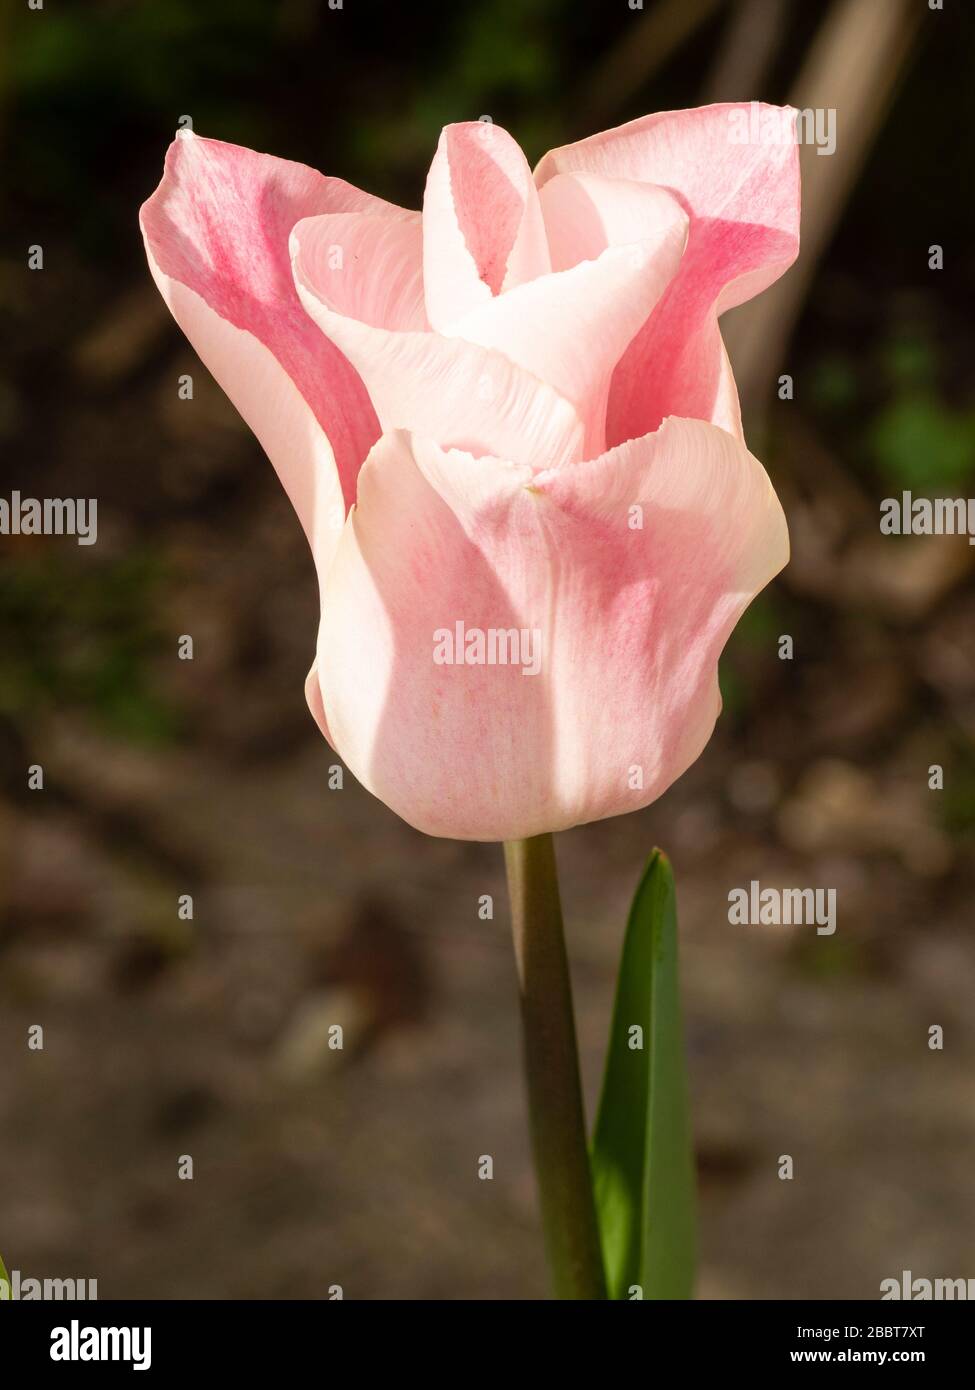 Single bloom of the lily flowered hardy tulip, Tulipa 'China Pink' Stock Photo